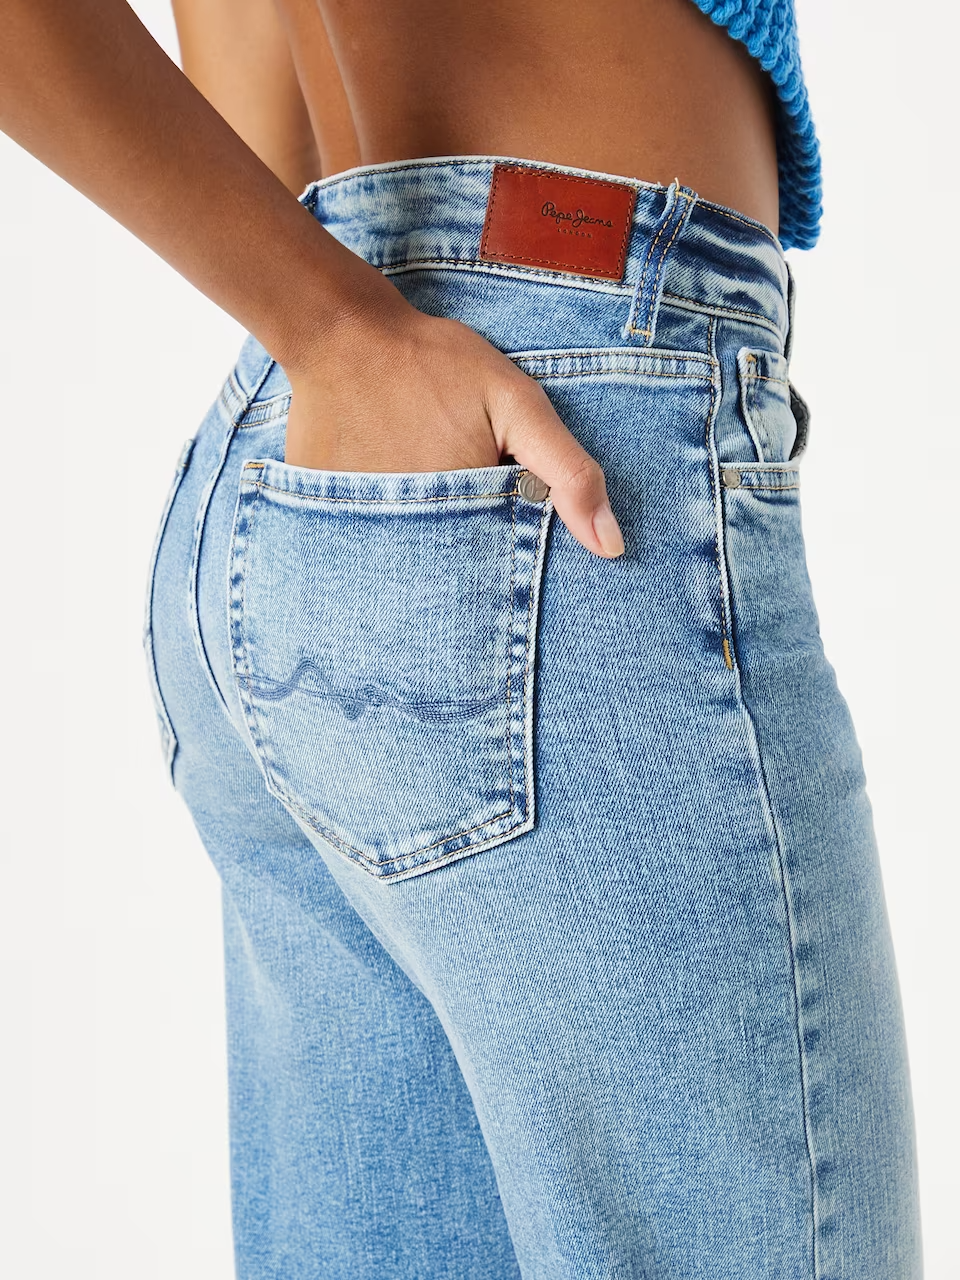 Buy Pepe Jeans LEXA SKY HIGH Jeans by Pepe Jeans